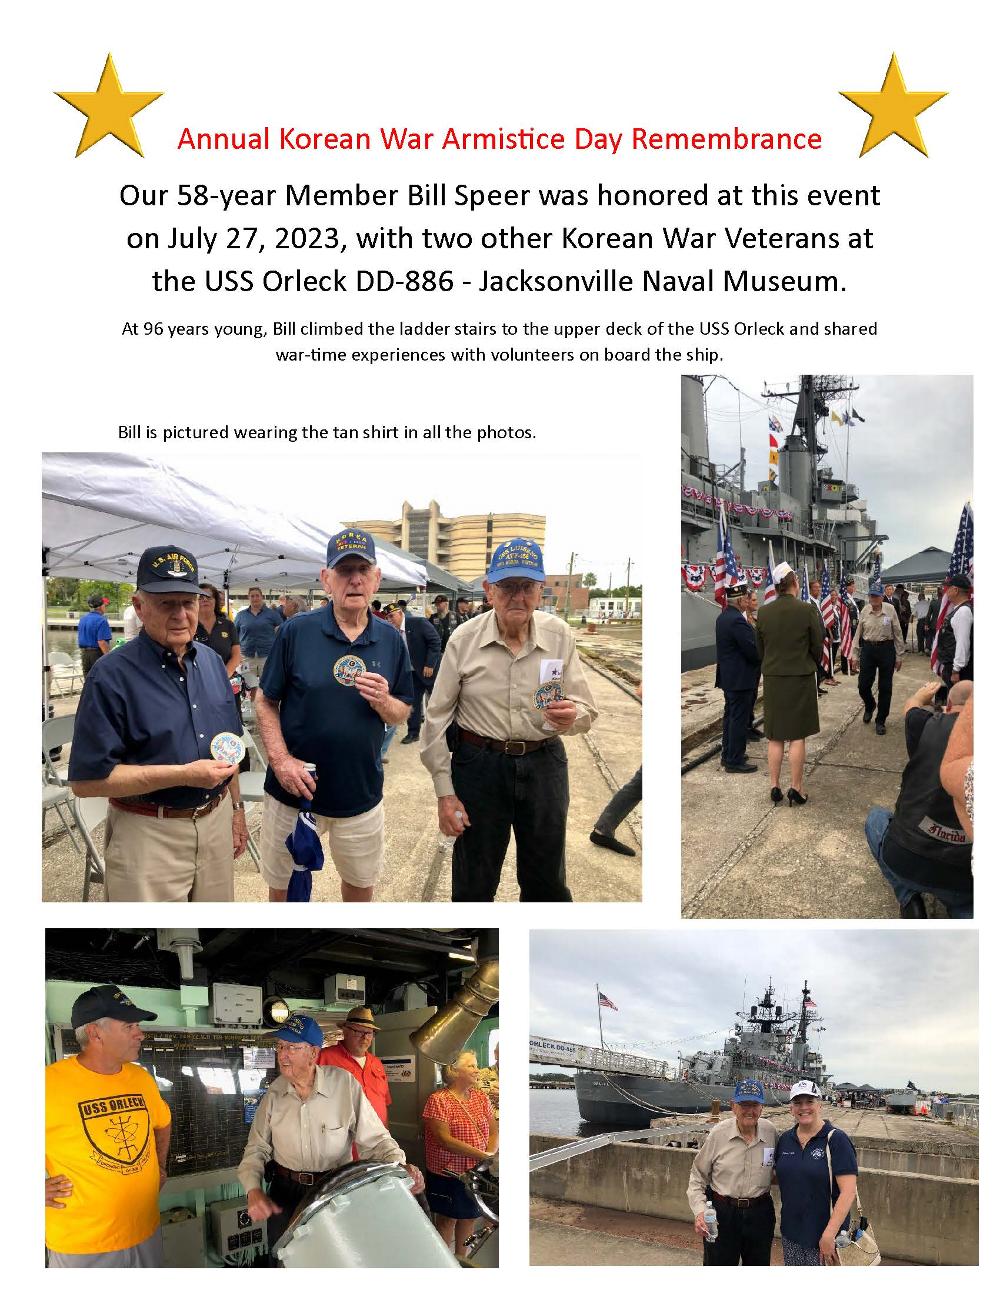 Annual Korean War Armistice Day Remembrance:
Our 58-year Member Bill Speer was honored at this event on July 27, 2023, with two other Korean War Veterans at the USS Orleck DD-886 - Jacksonville Naval Museum.
